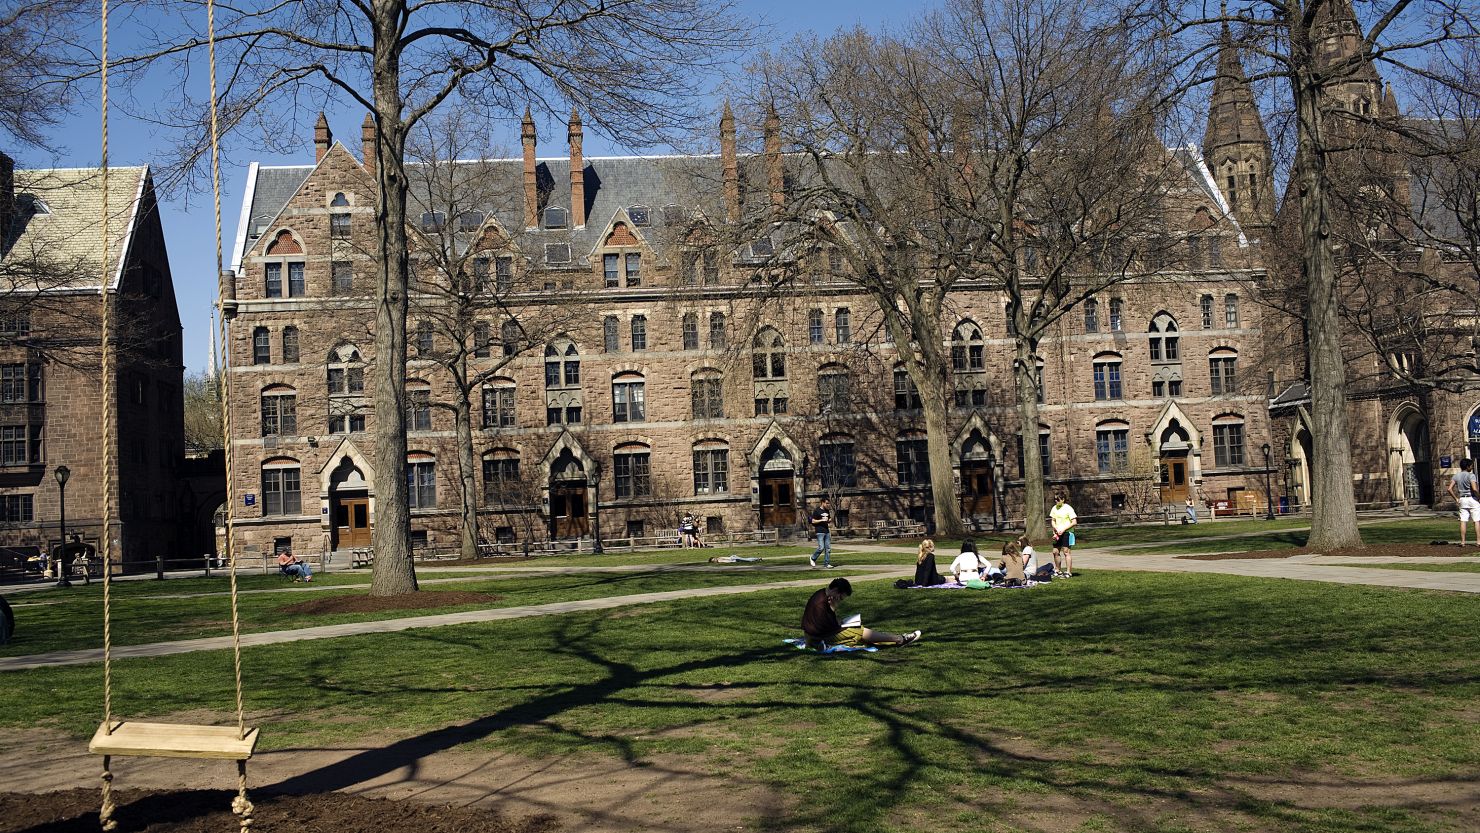 The U.S. Department of Education reached a settlement with Yale University on Friday over allegations of sexual harassment.